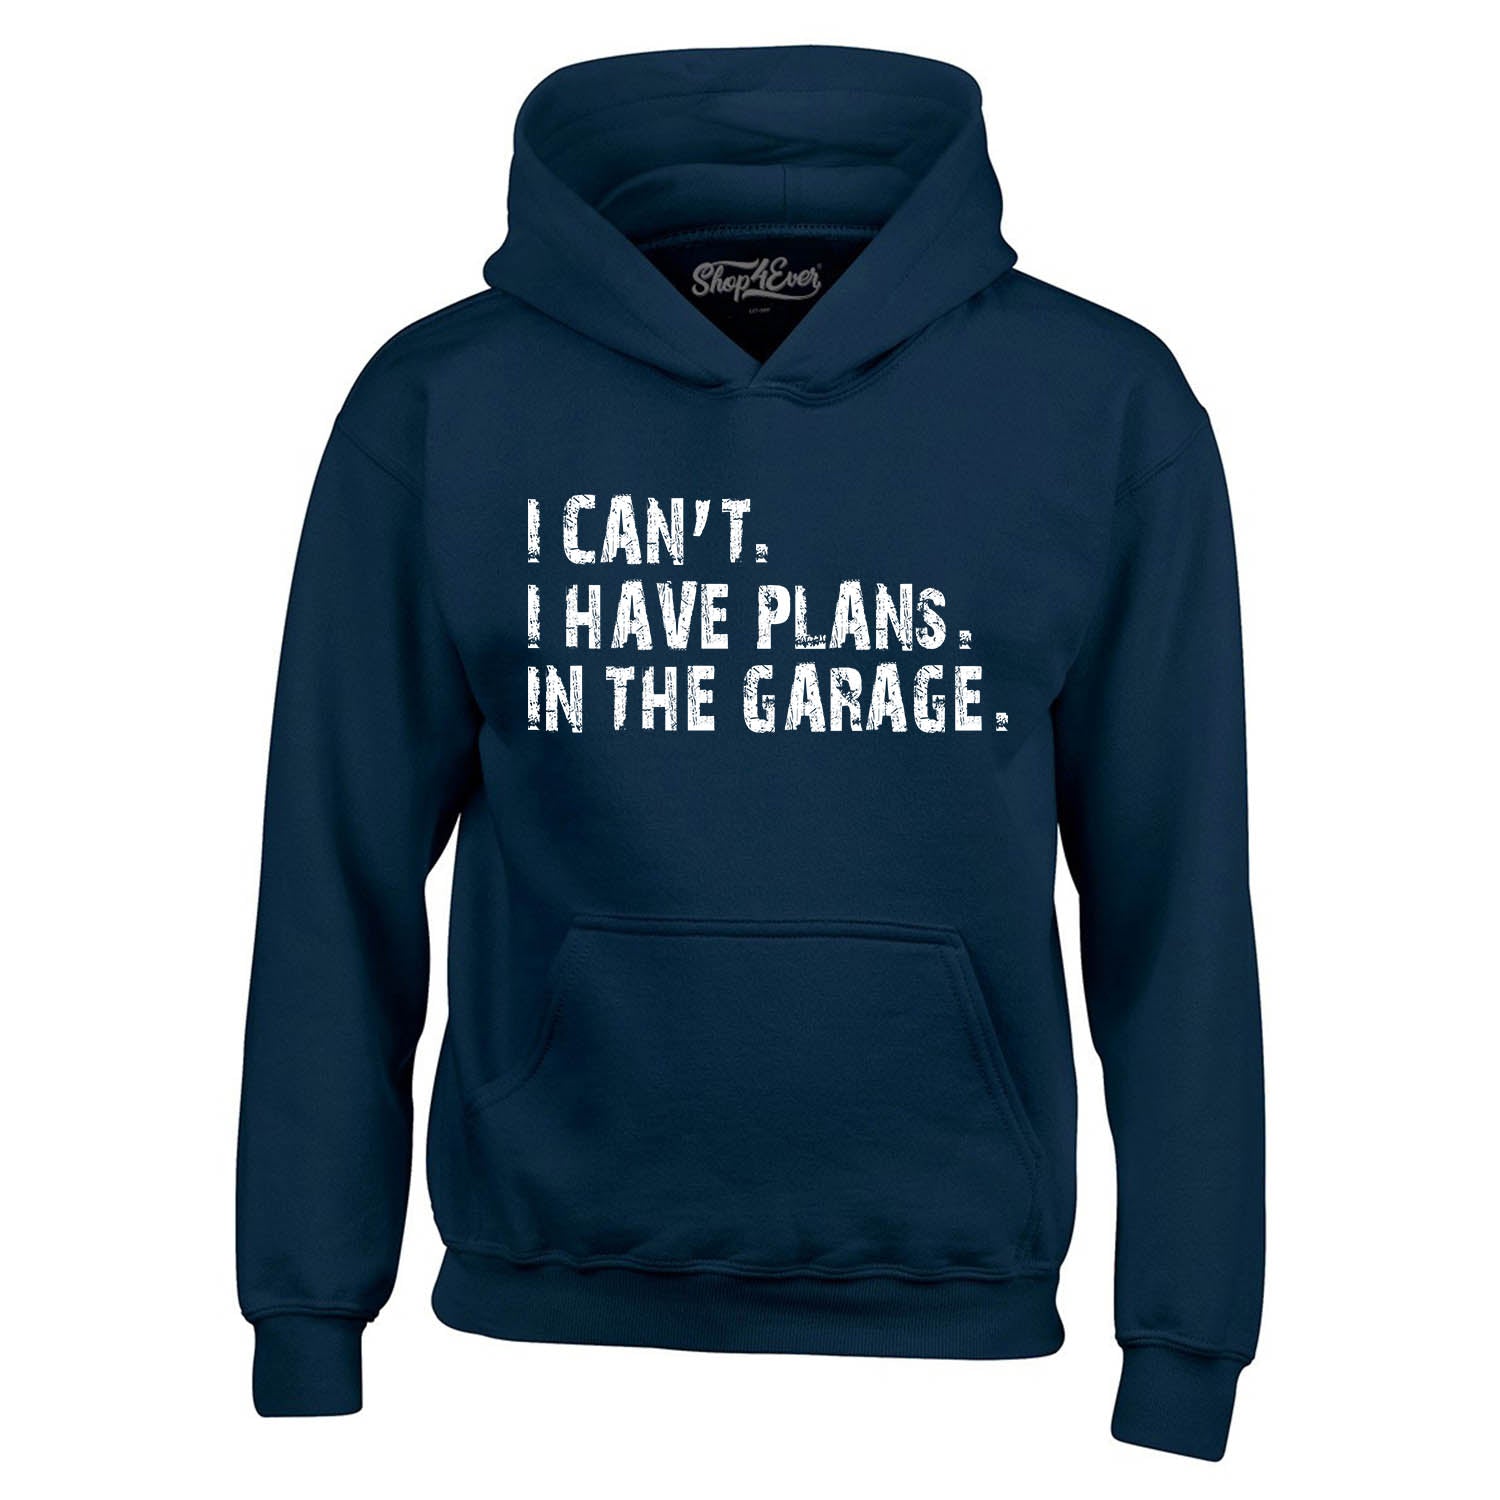 I Can't I Have Plans in the Garage Hoodie Sweatshirts